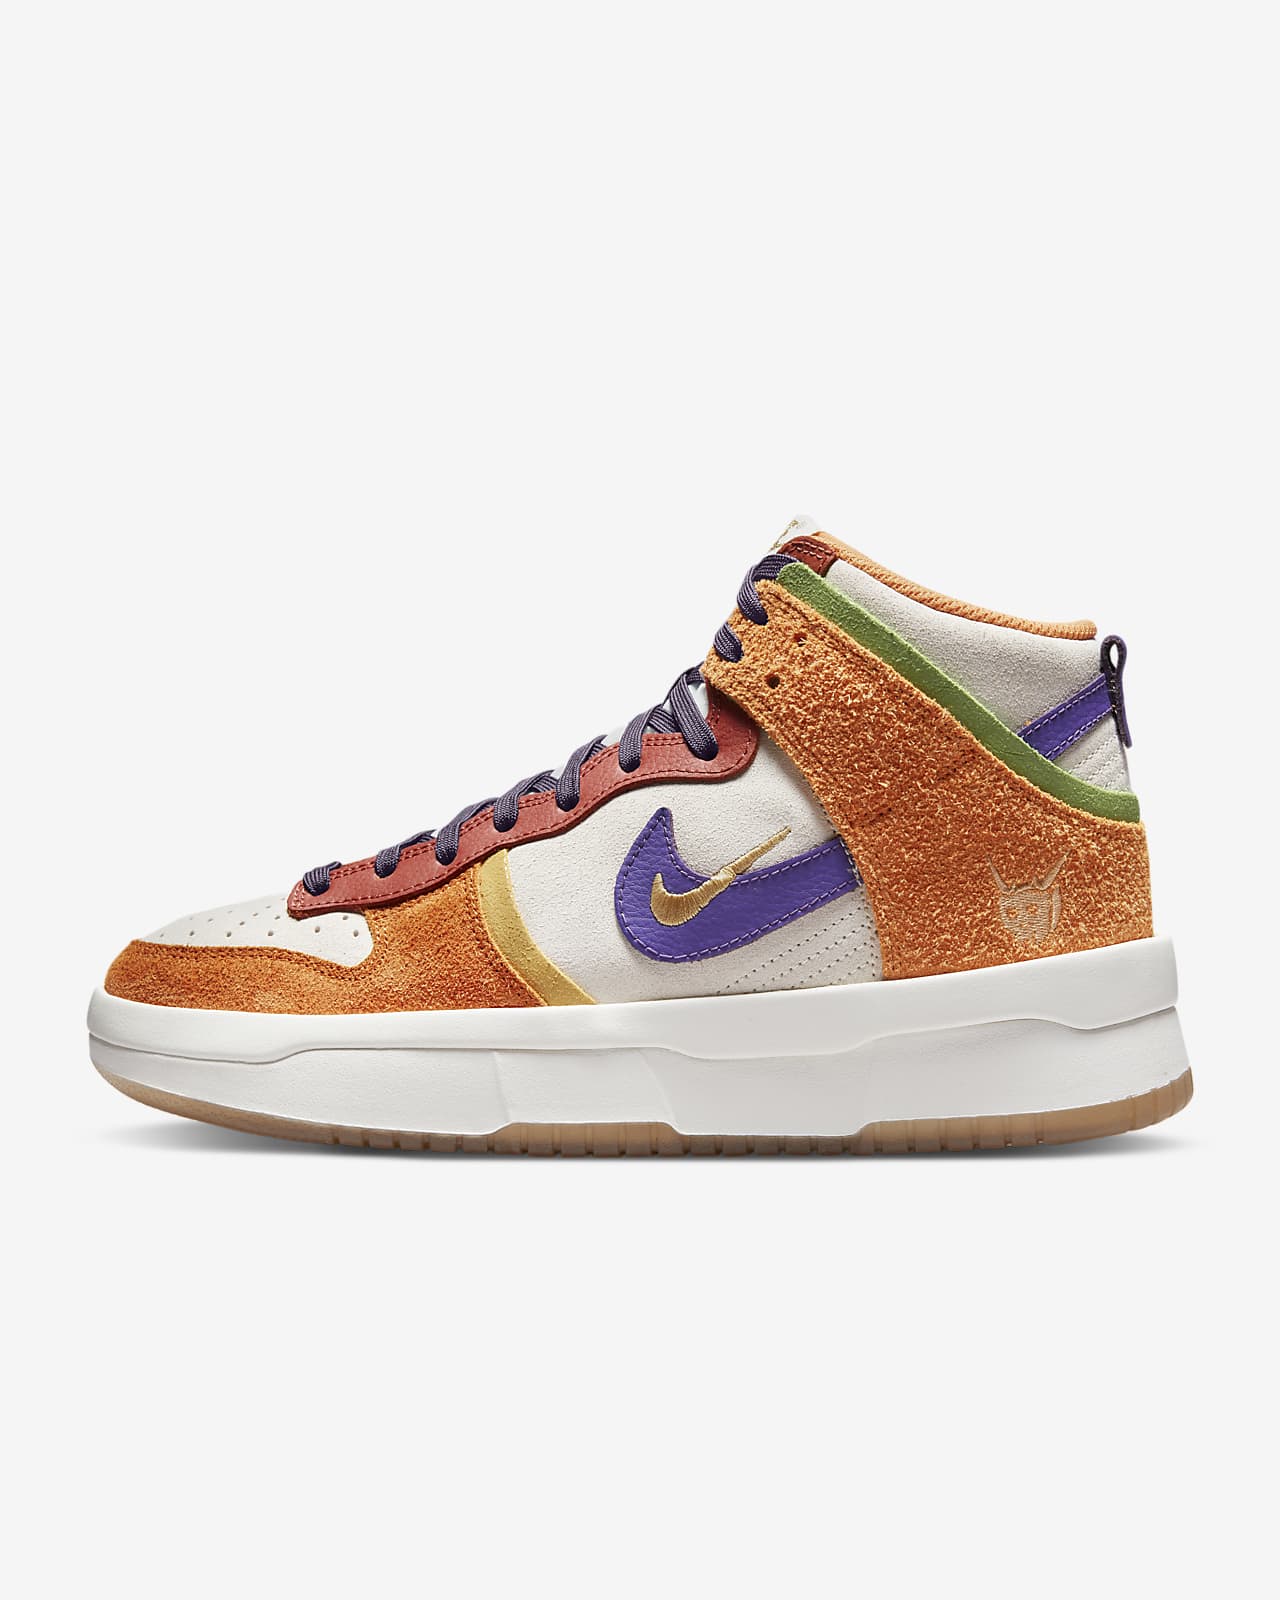 Nike Dunk High Up Premium Womens Shoes Review